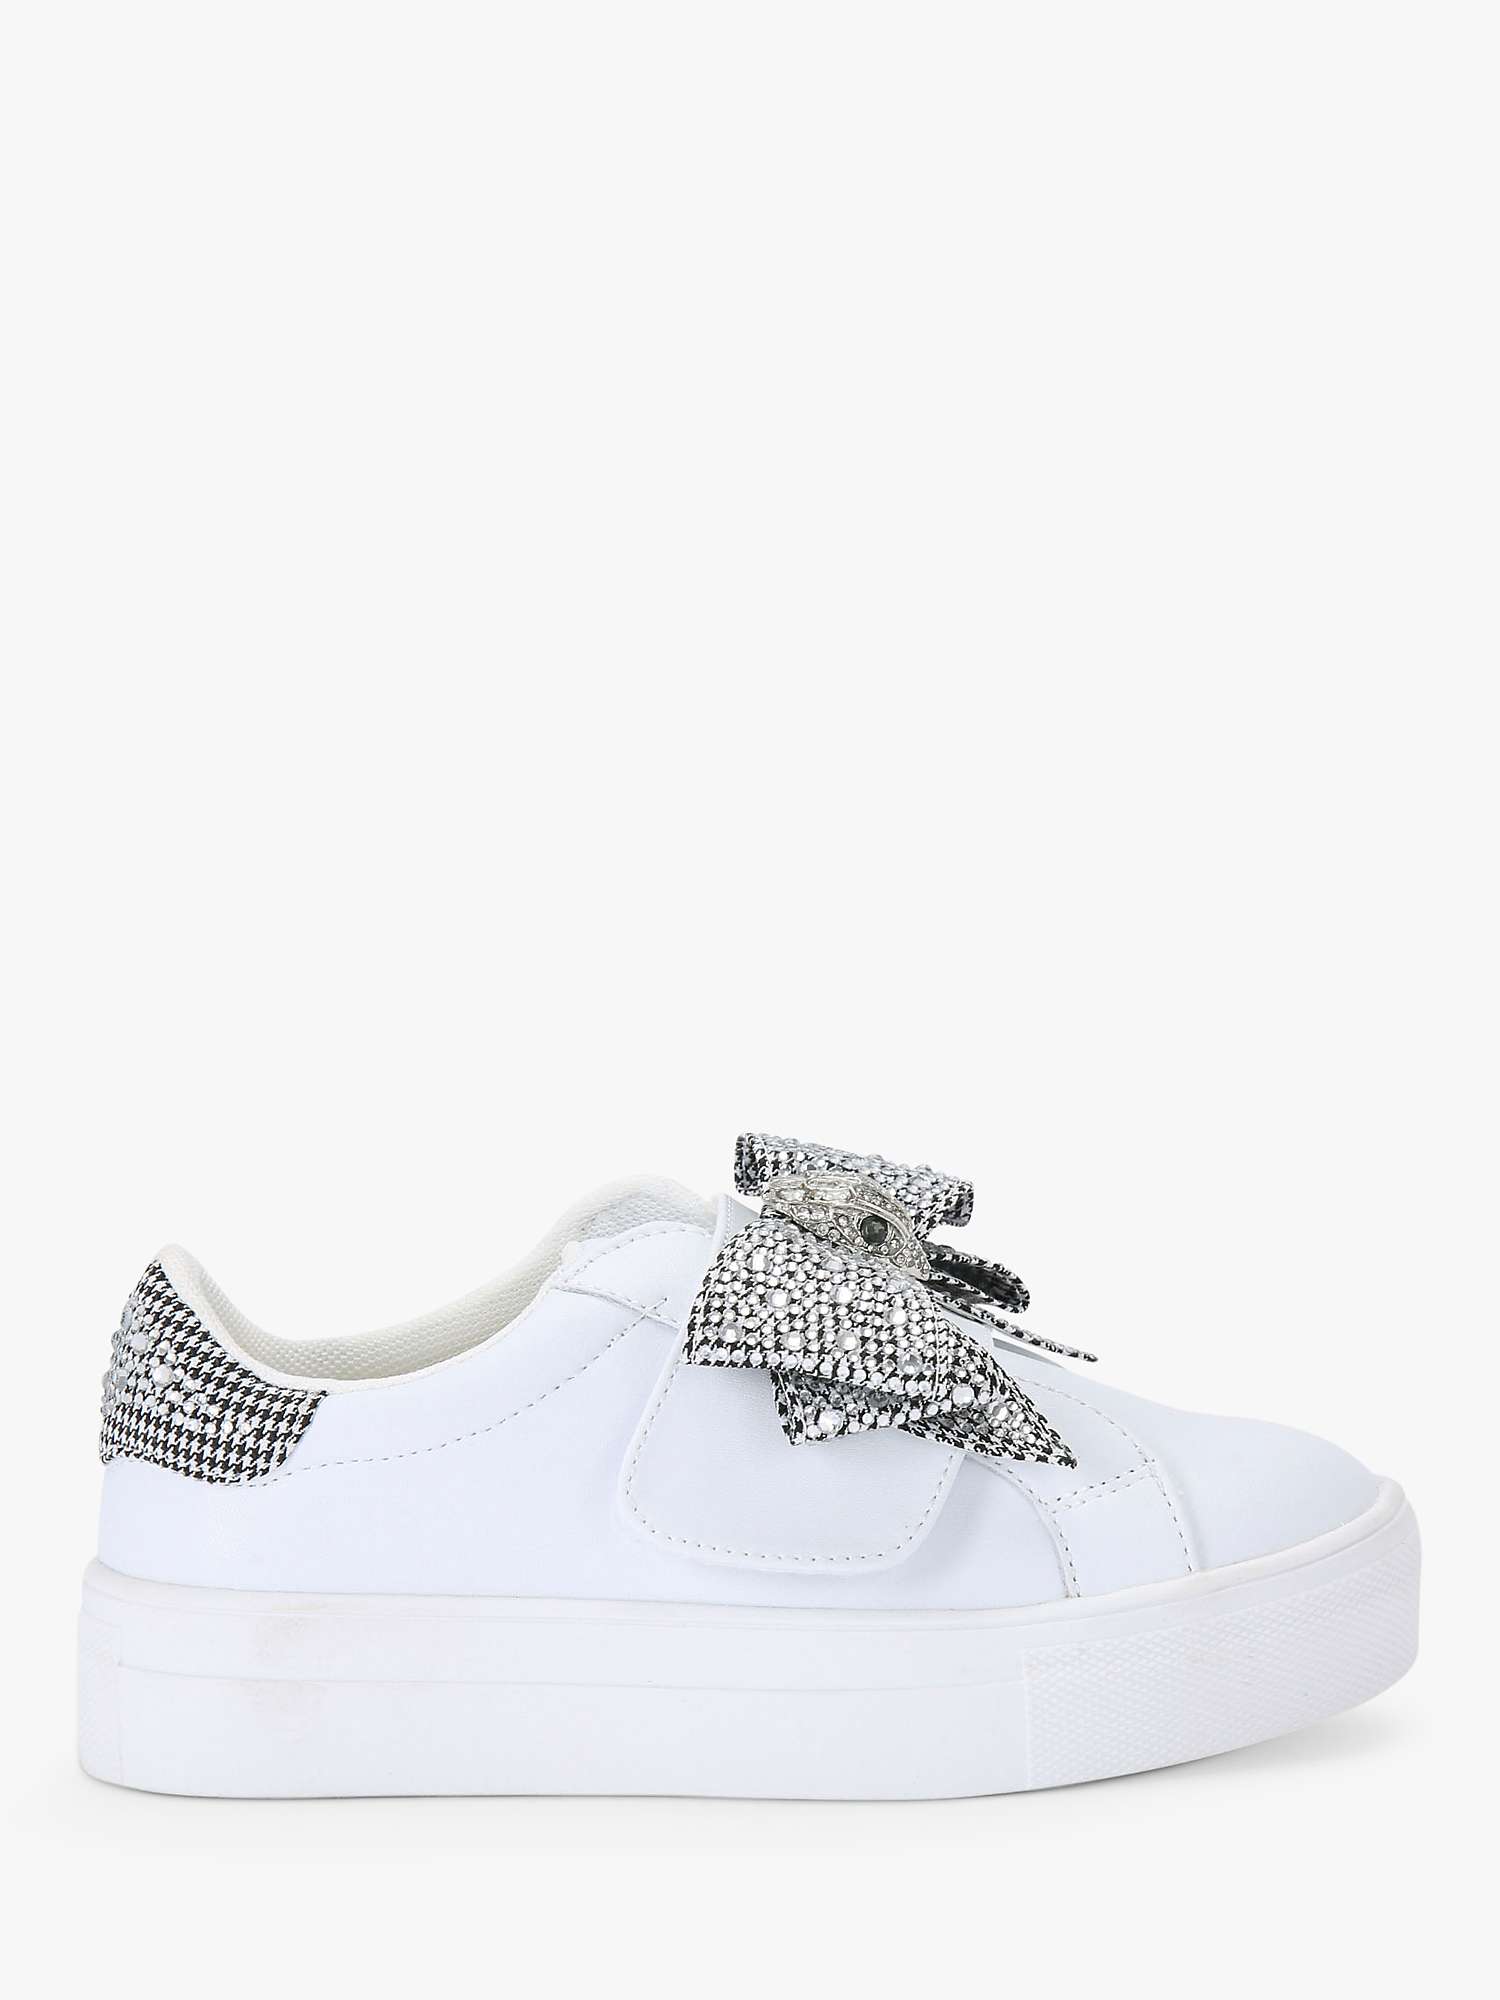 Buy Kurt Geiger London Kids' Mini Laney Bow Leather Trainers, White/Silver Online at johnlewis.com